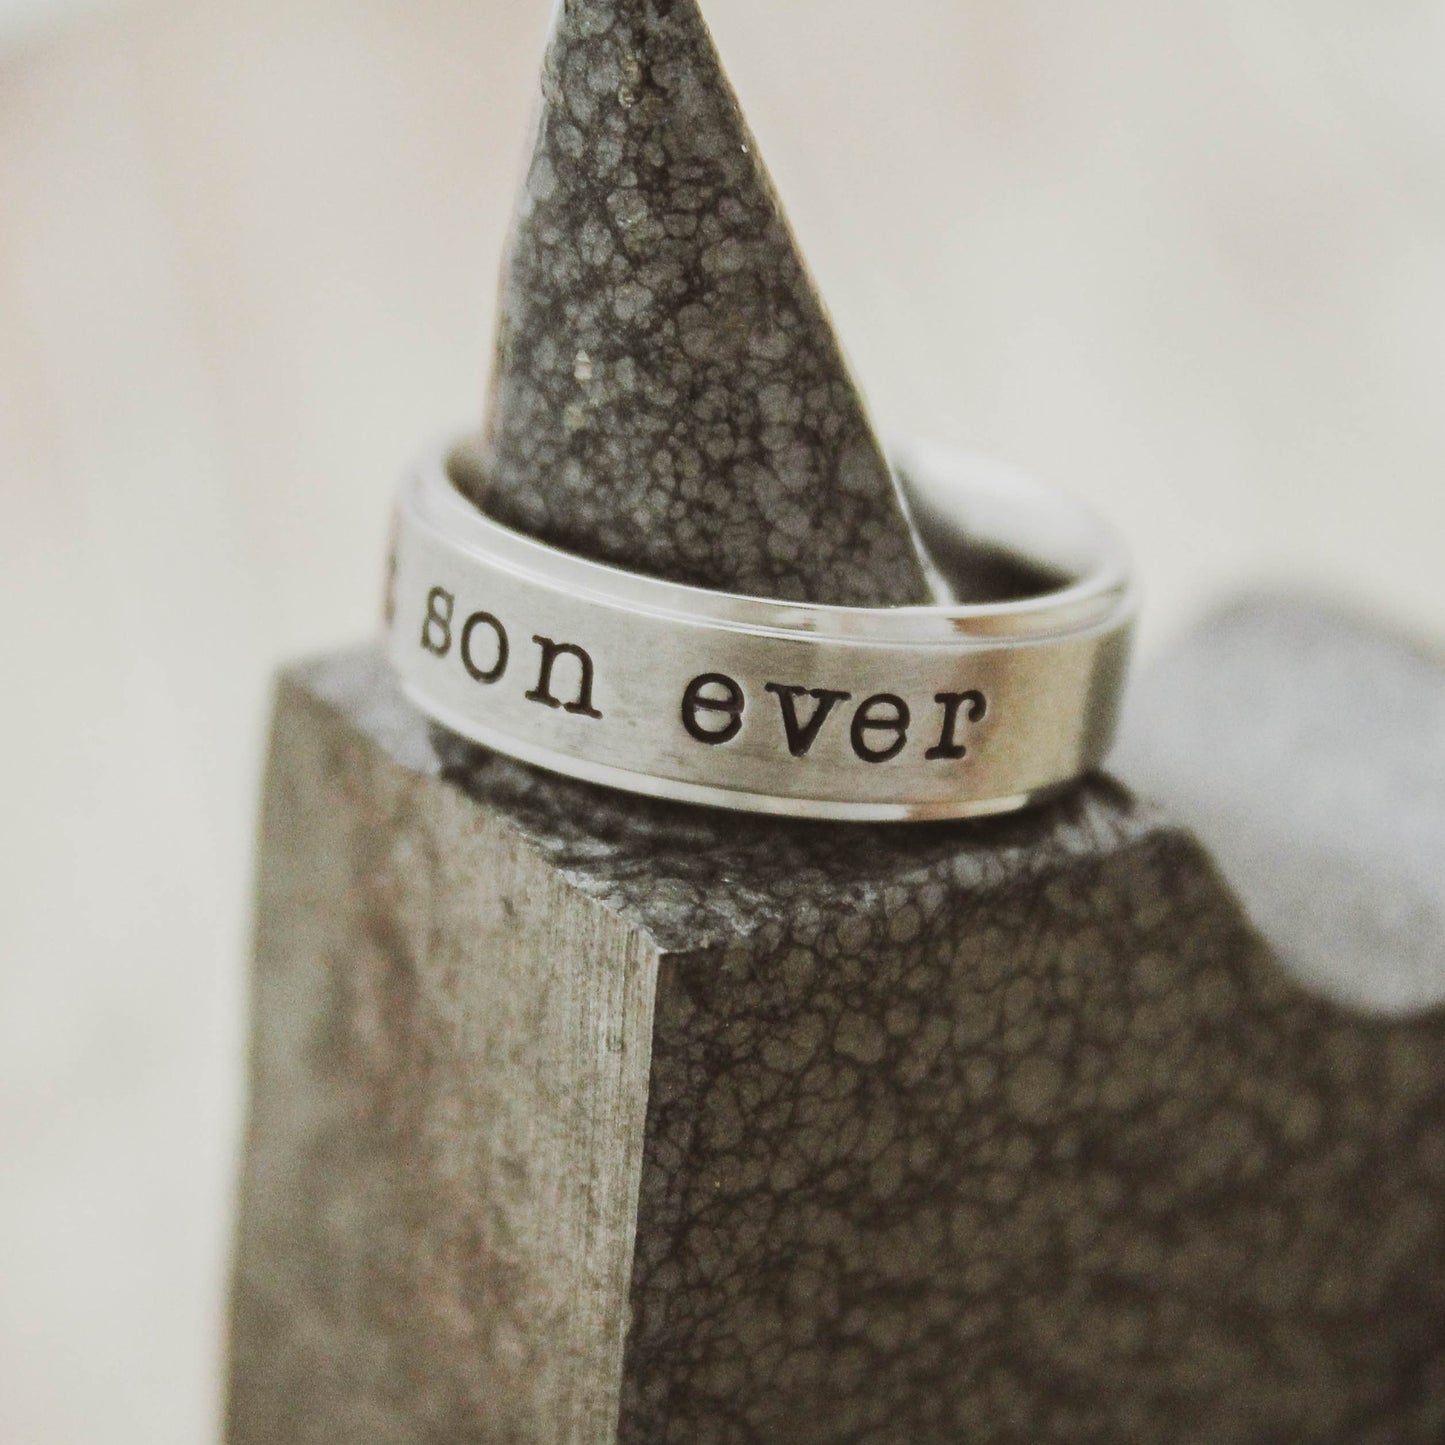 Best SON Ever Personalized Ring, Customized Silver Ring, Gift for Son, Hand Stamped Stainless Steel Name Ring, Shiny Silver Custom Ring